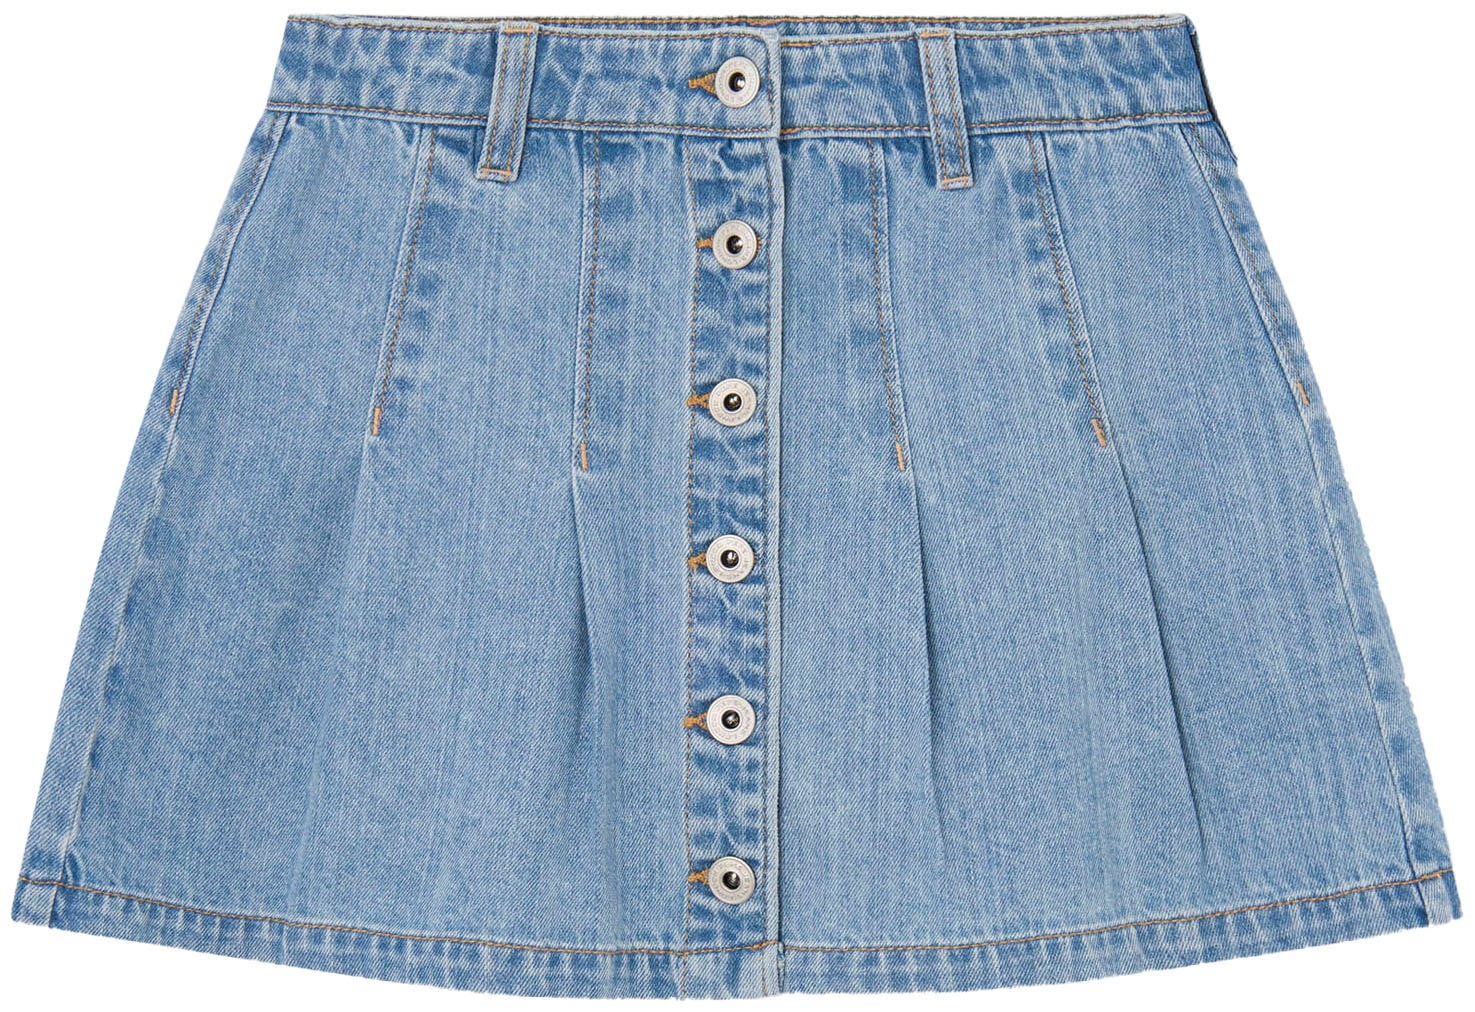 Pepe Jeans A-Linien-Rock von Pepe Jeans